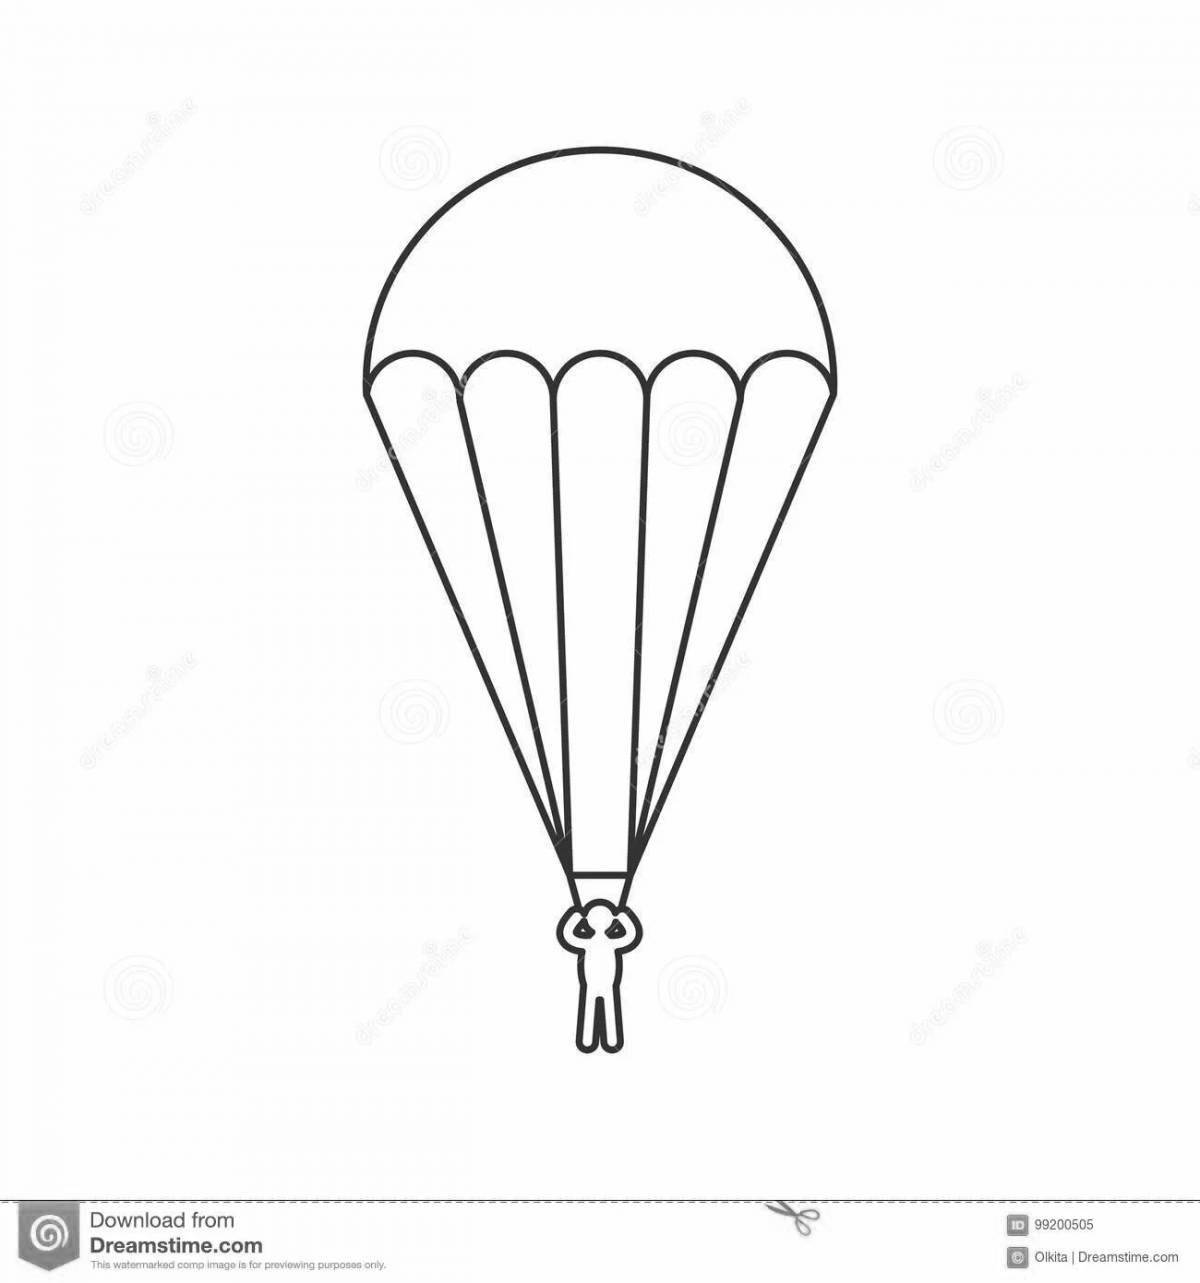 Charming skydiver coloring page